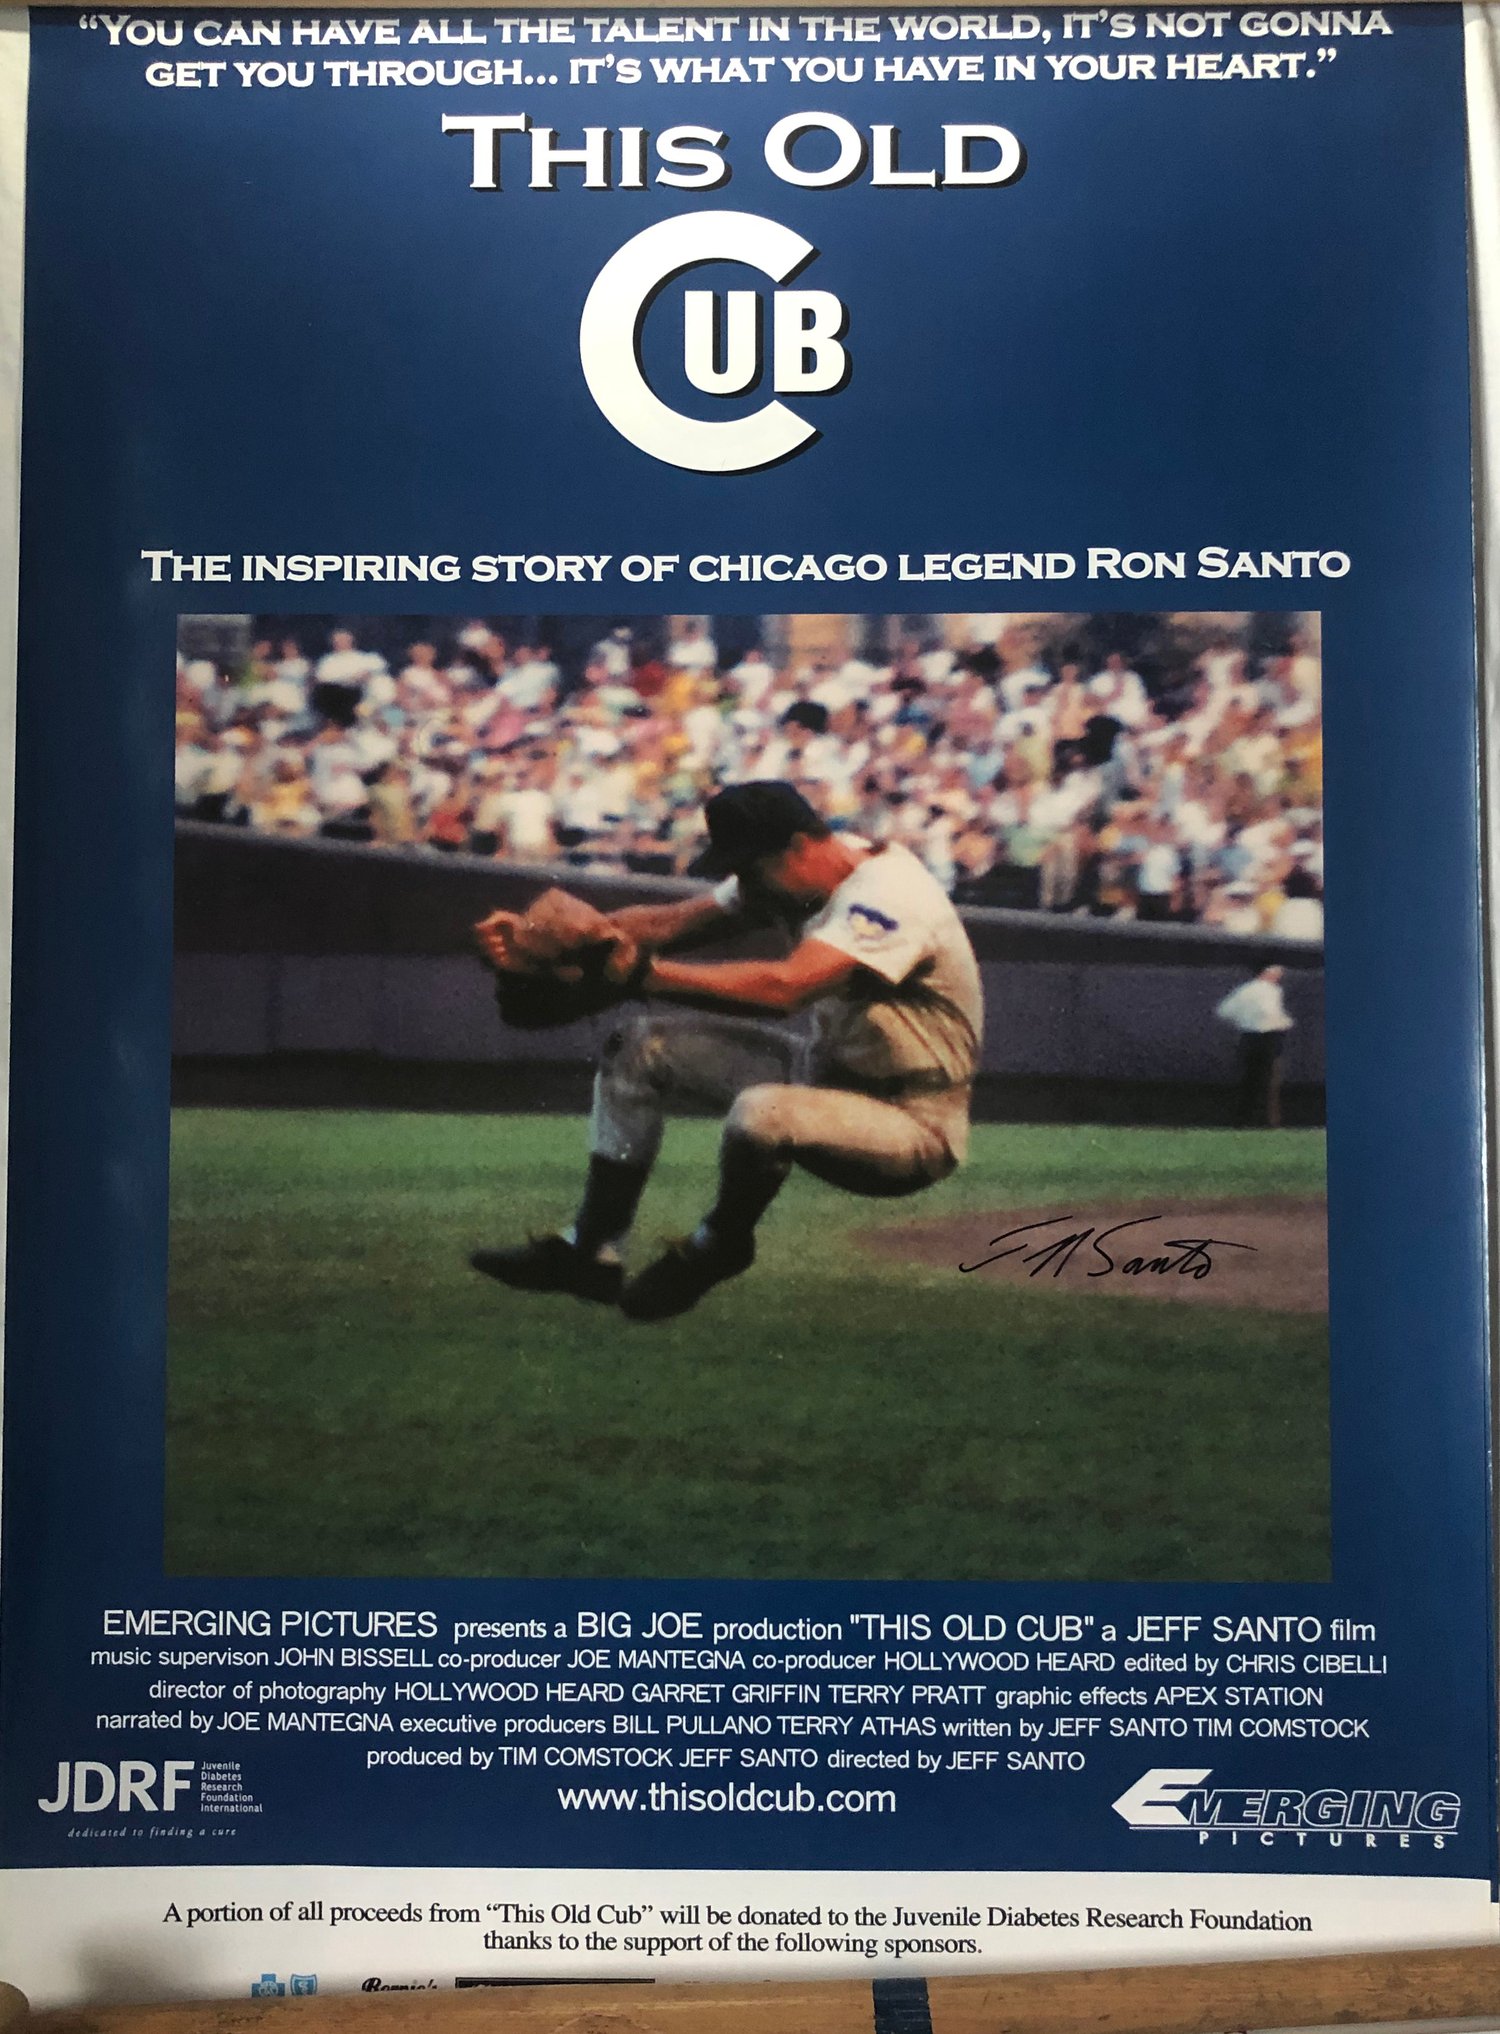 "This Old Cub" Movie Poster - Signed by Director